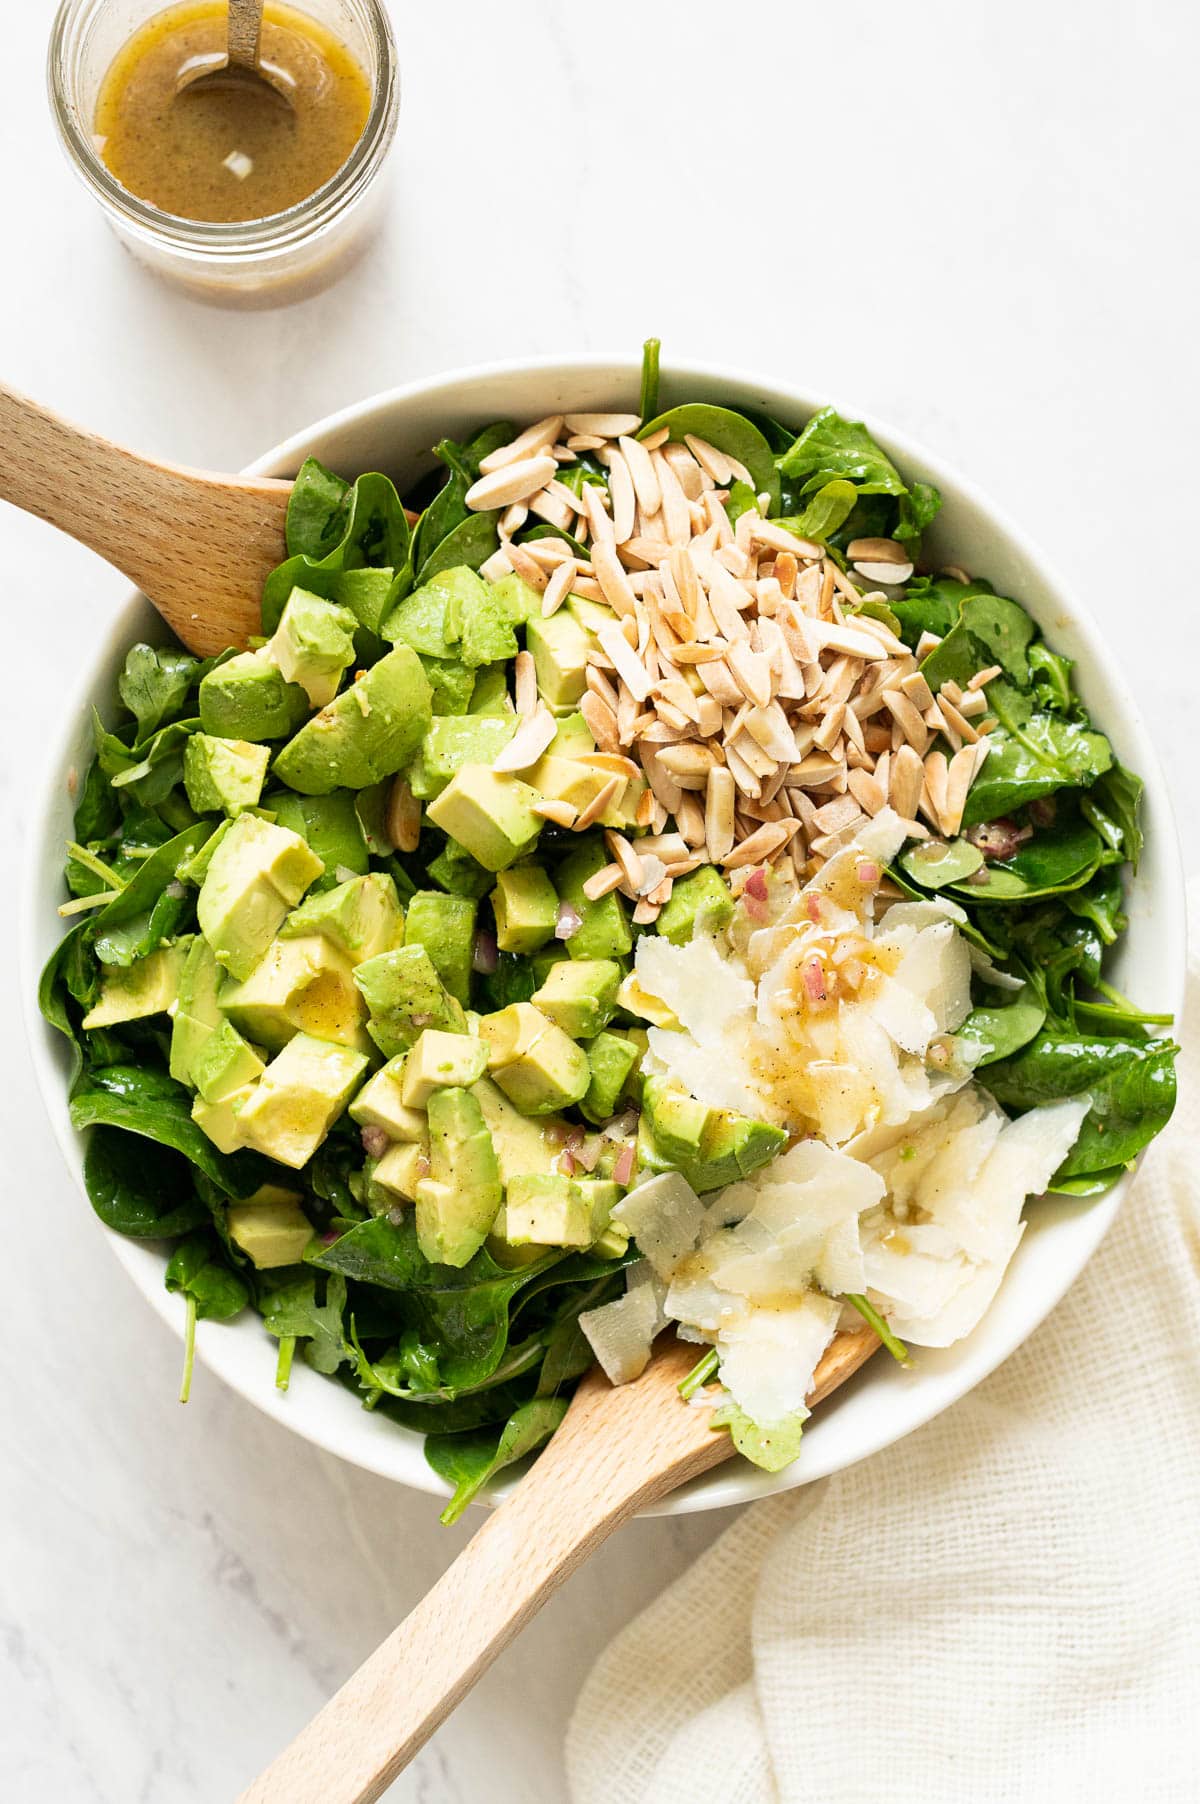 A bowl with spinach salad with avocado, almonds, parmesan cheese and spinach salad dressing drizzled on top.